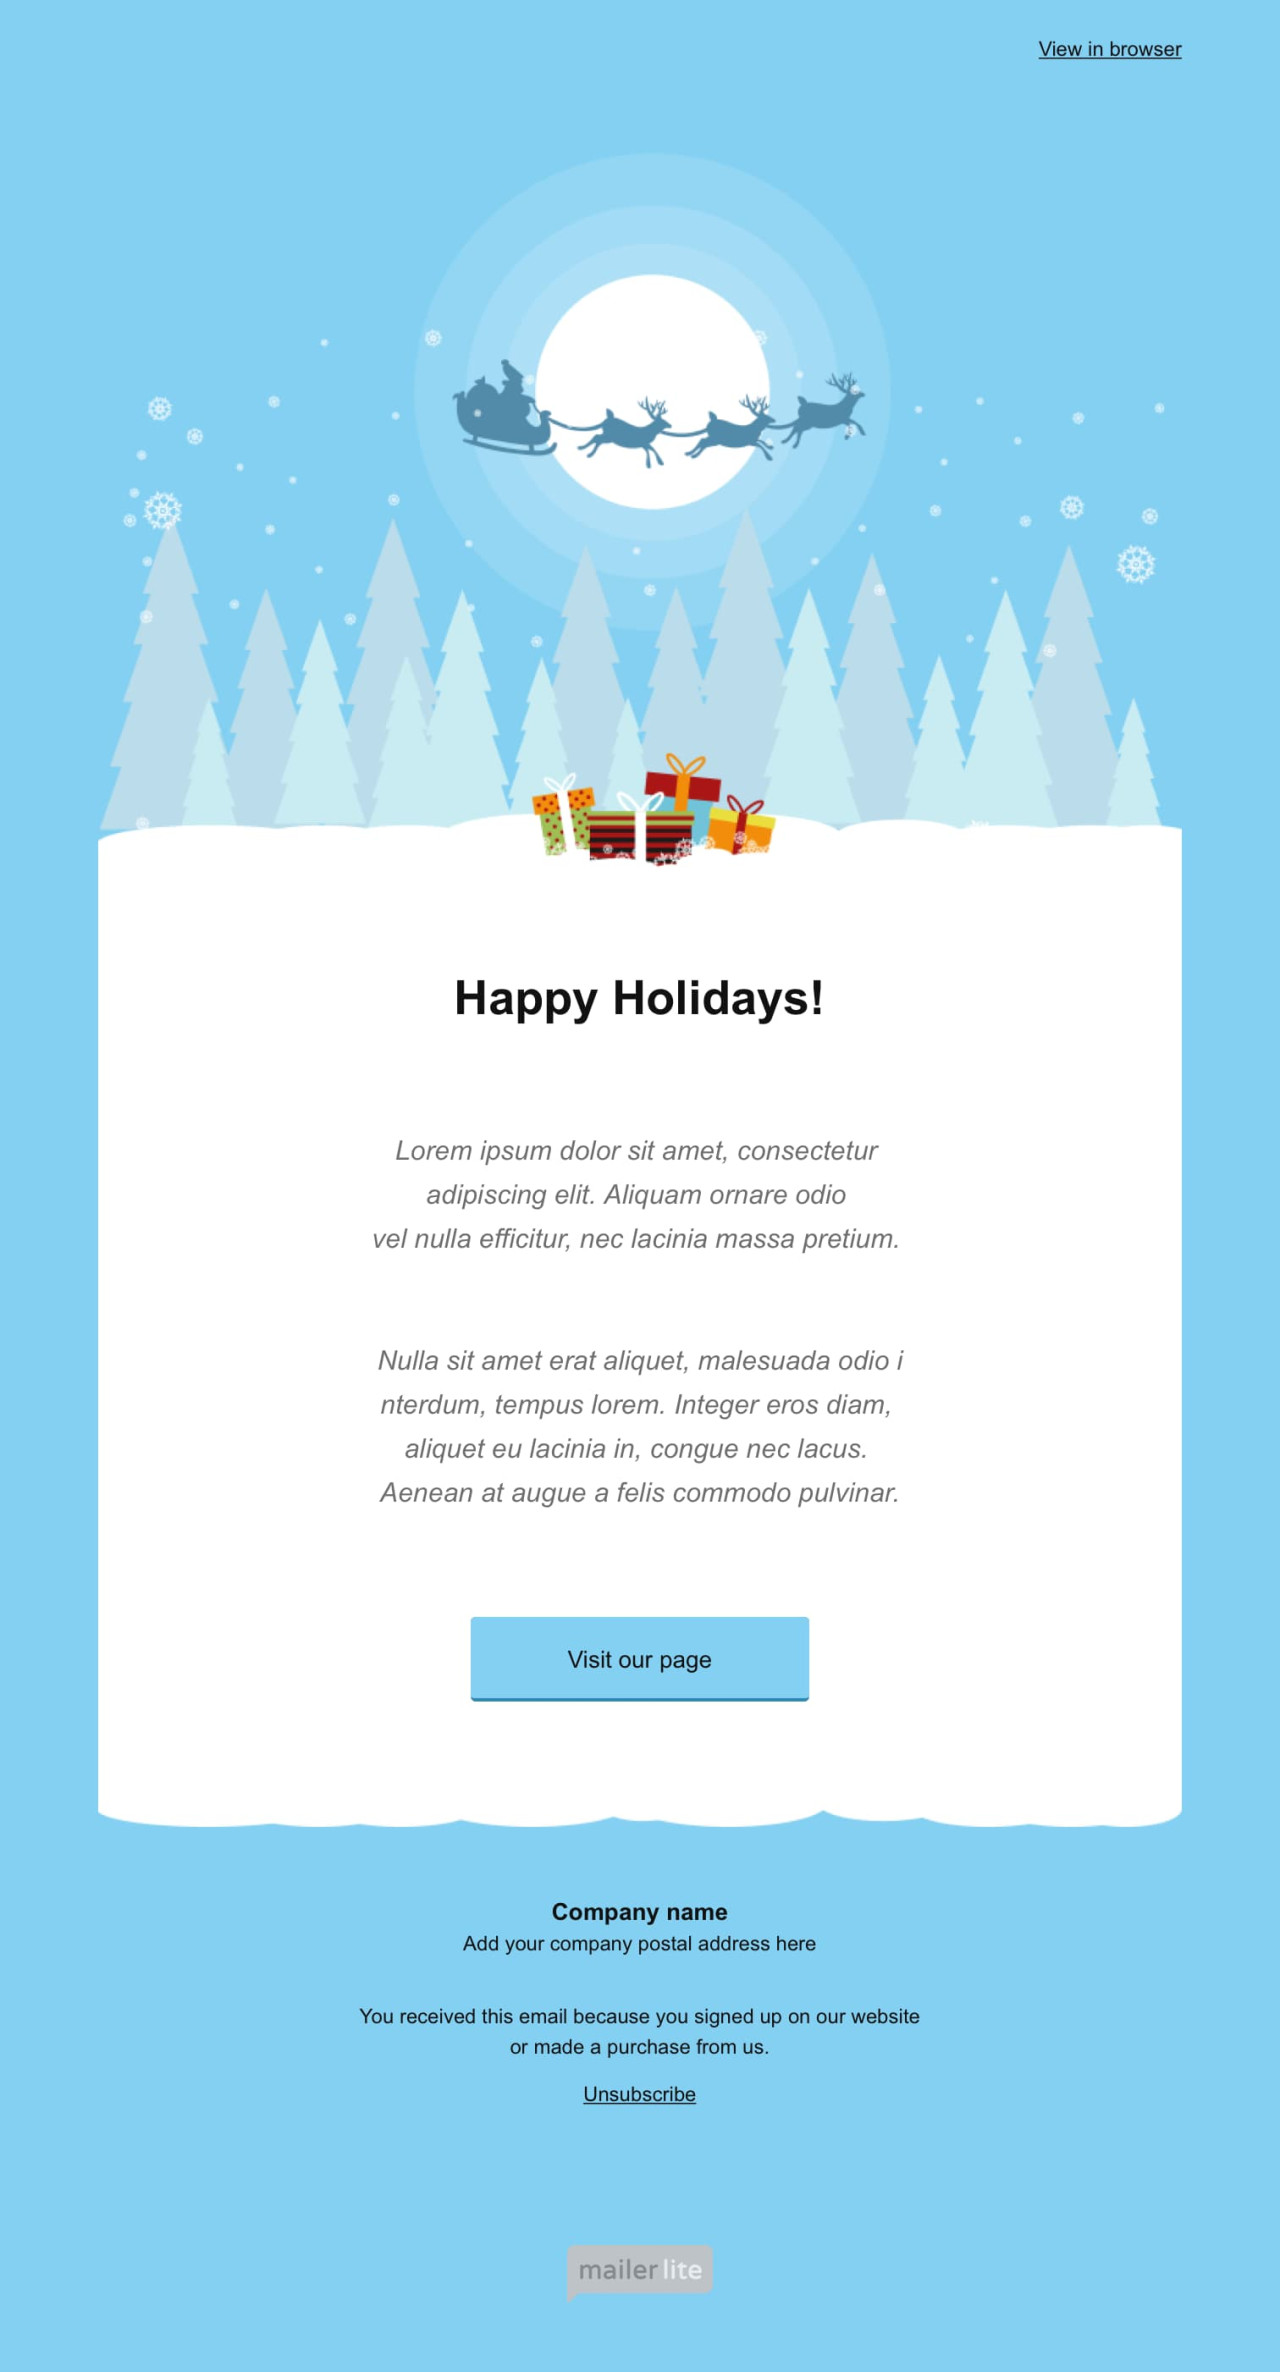 Merry Christmas email template template - Made by MailerLite